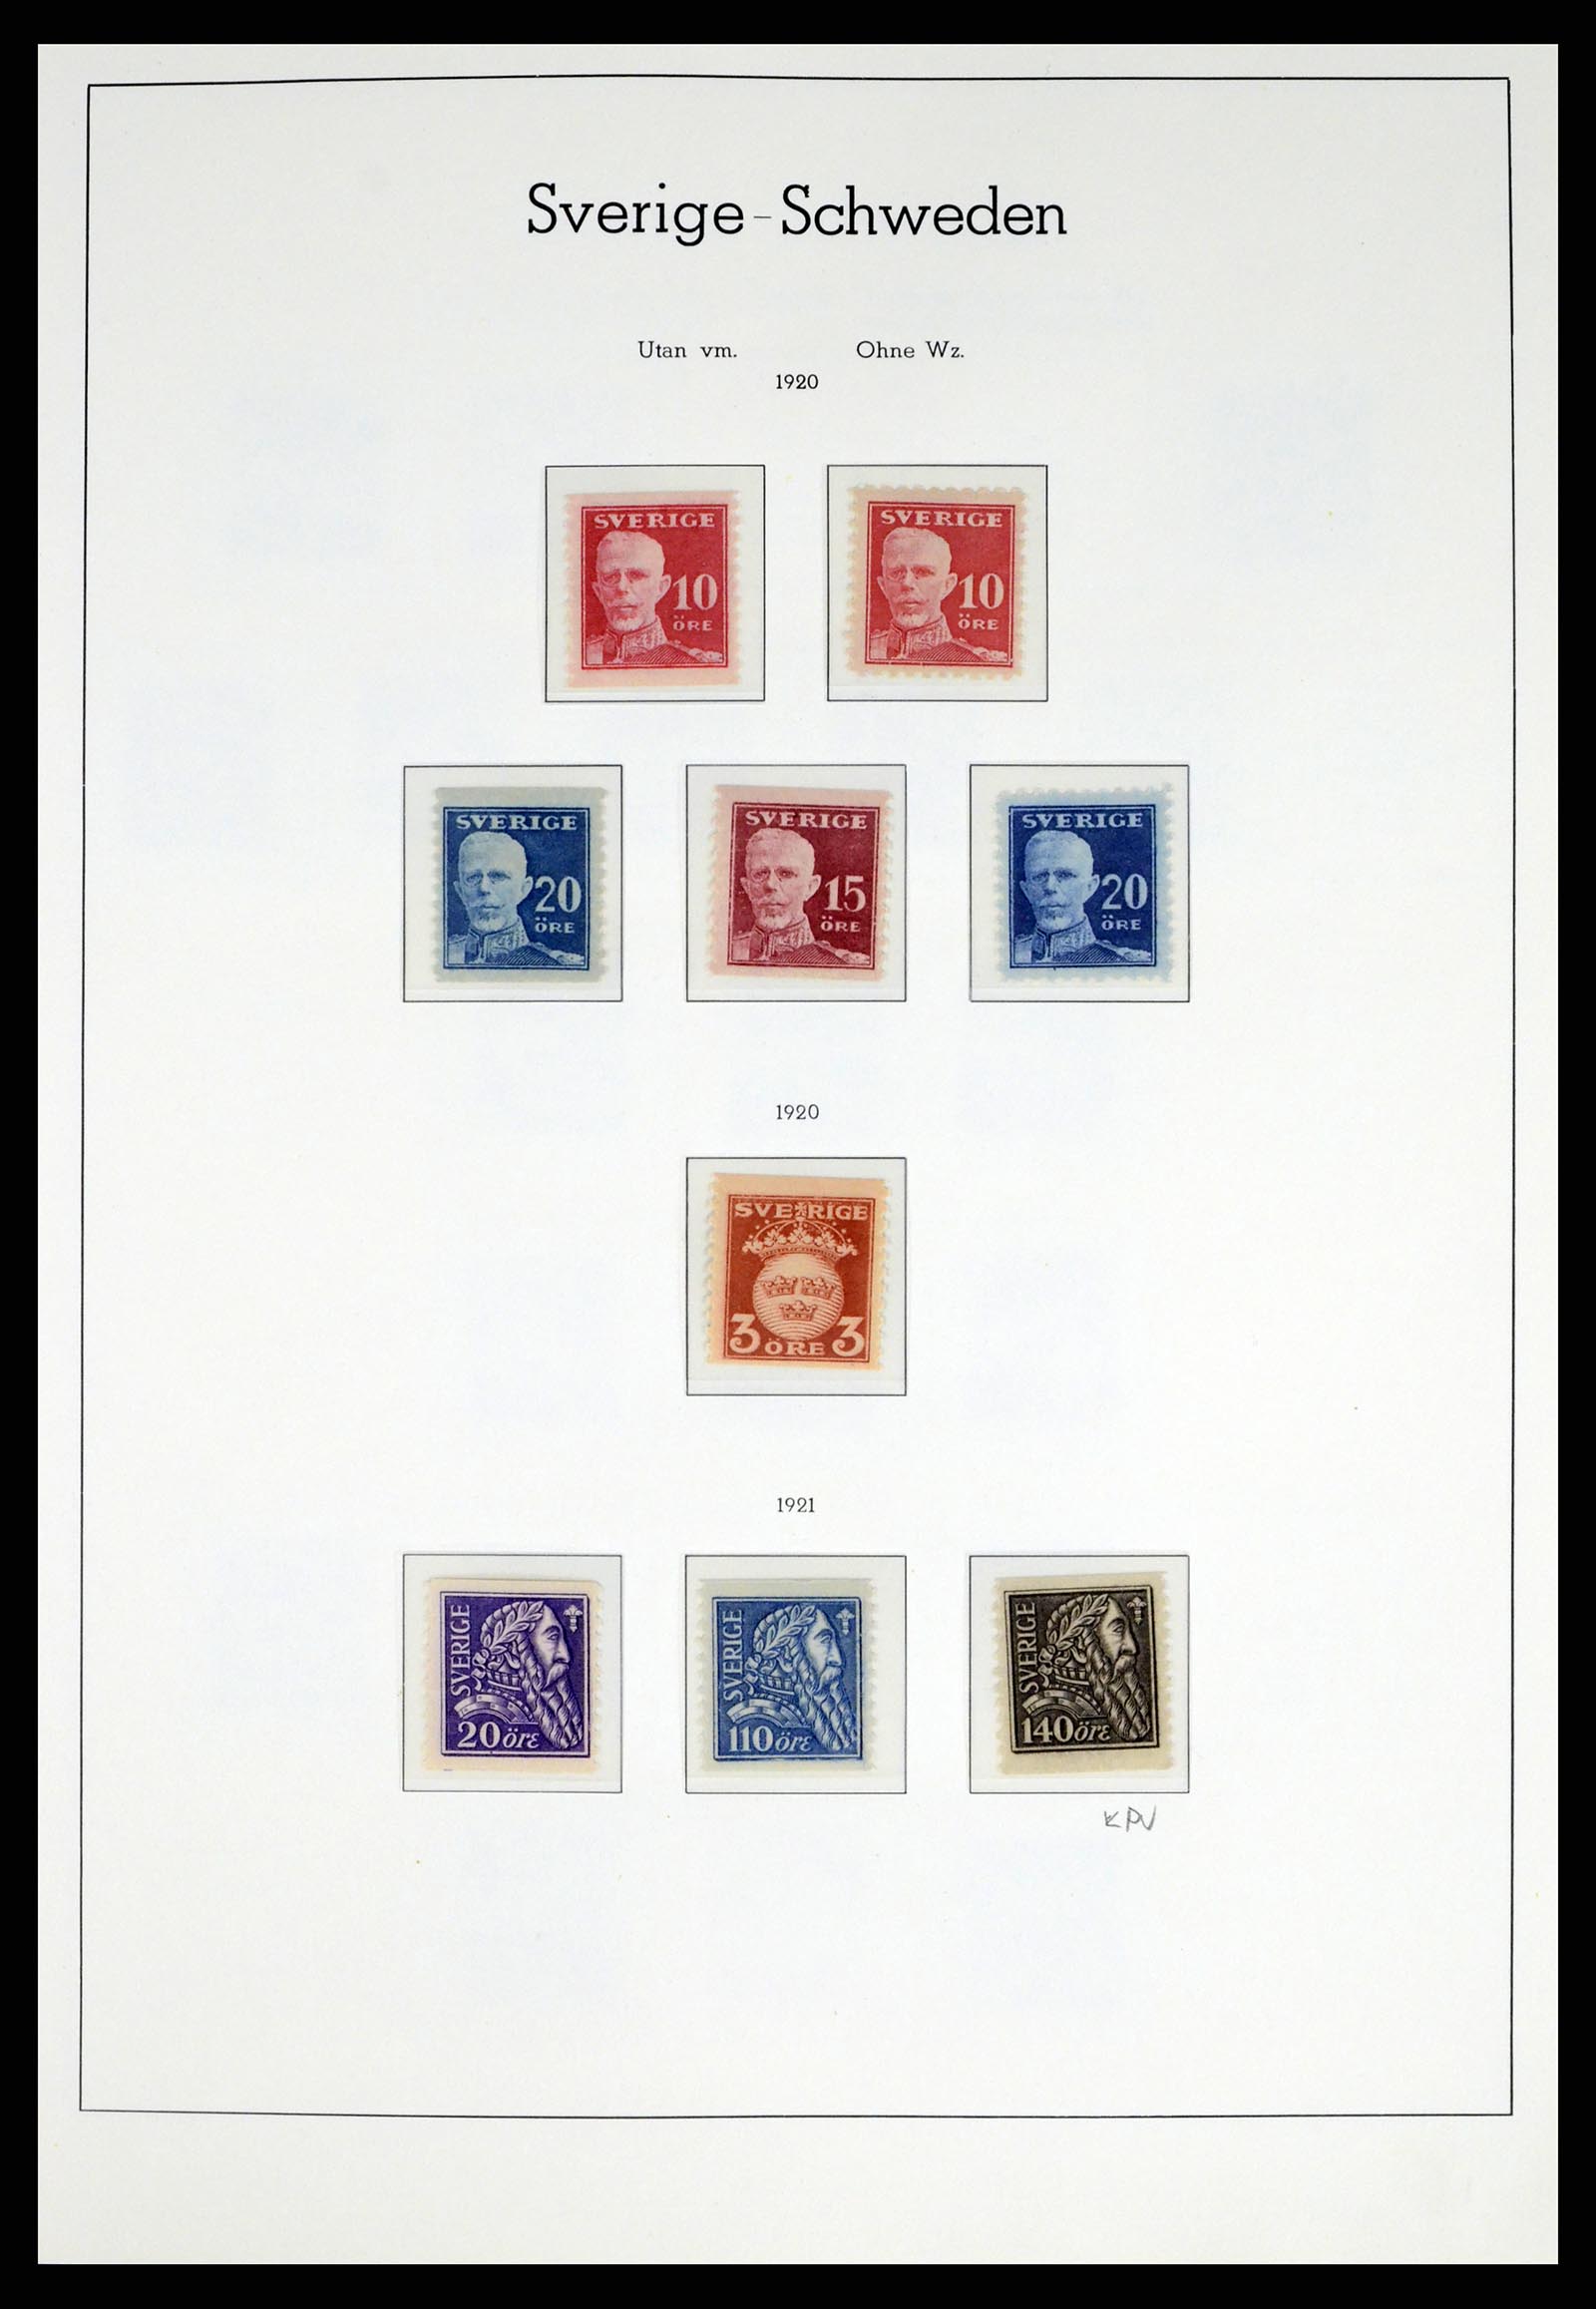 37397 013 - Stamp collection 37397 Sweden 1886-1990.